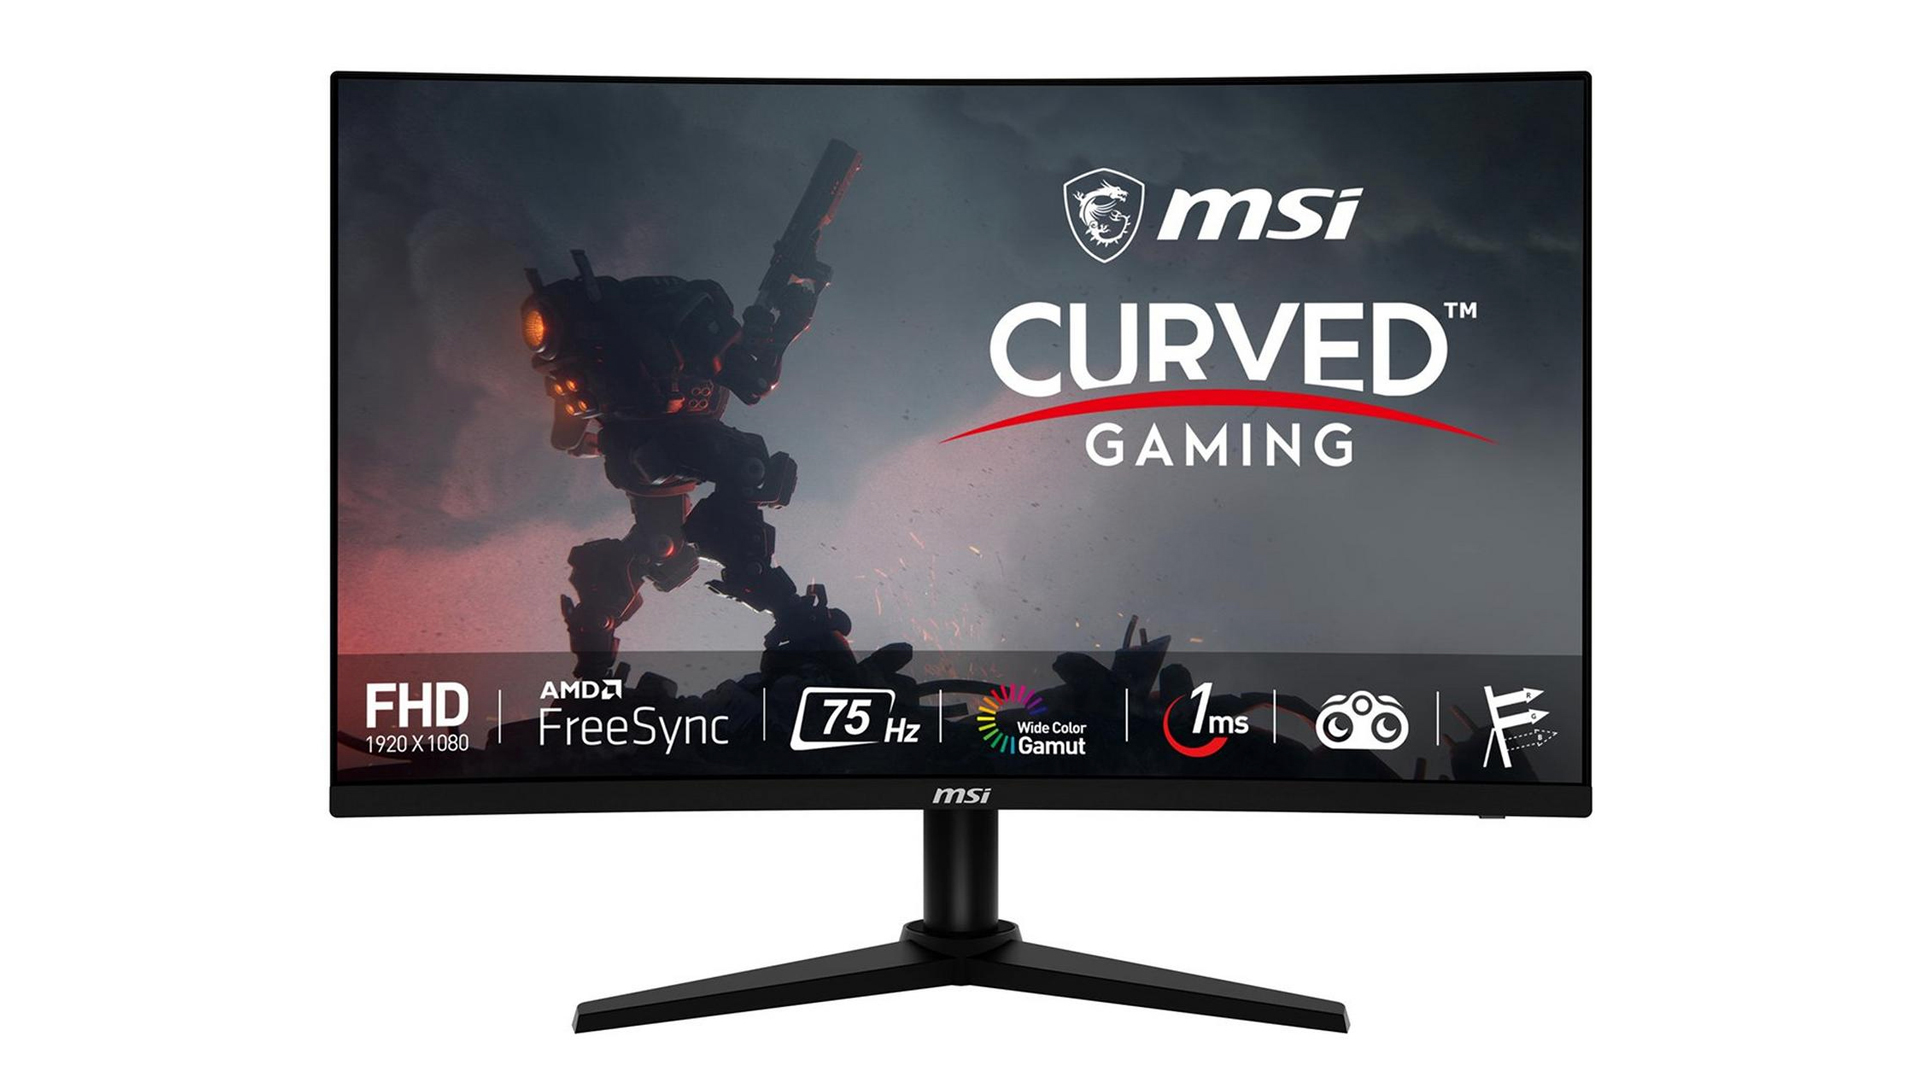 G274CV Curved Gaming Monitor - 27 Inch, 1ms Response Time, 1500R, 75Hz,  Free-Sync